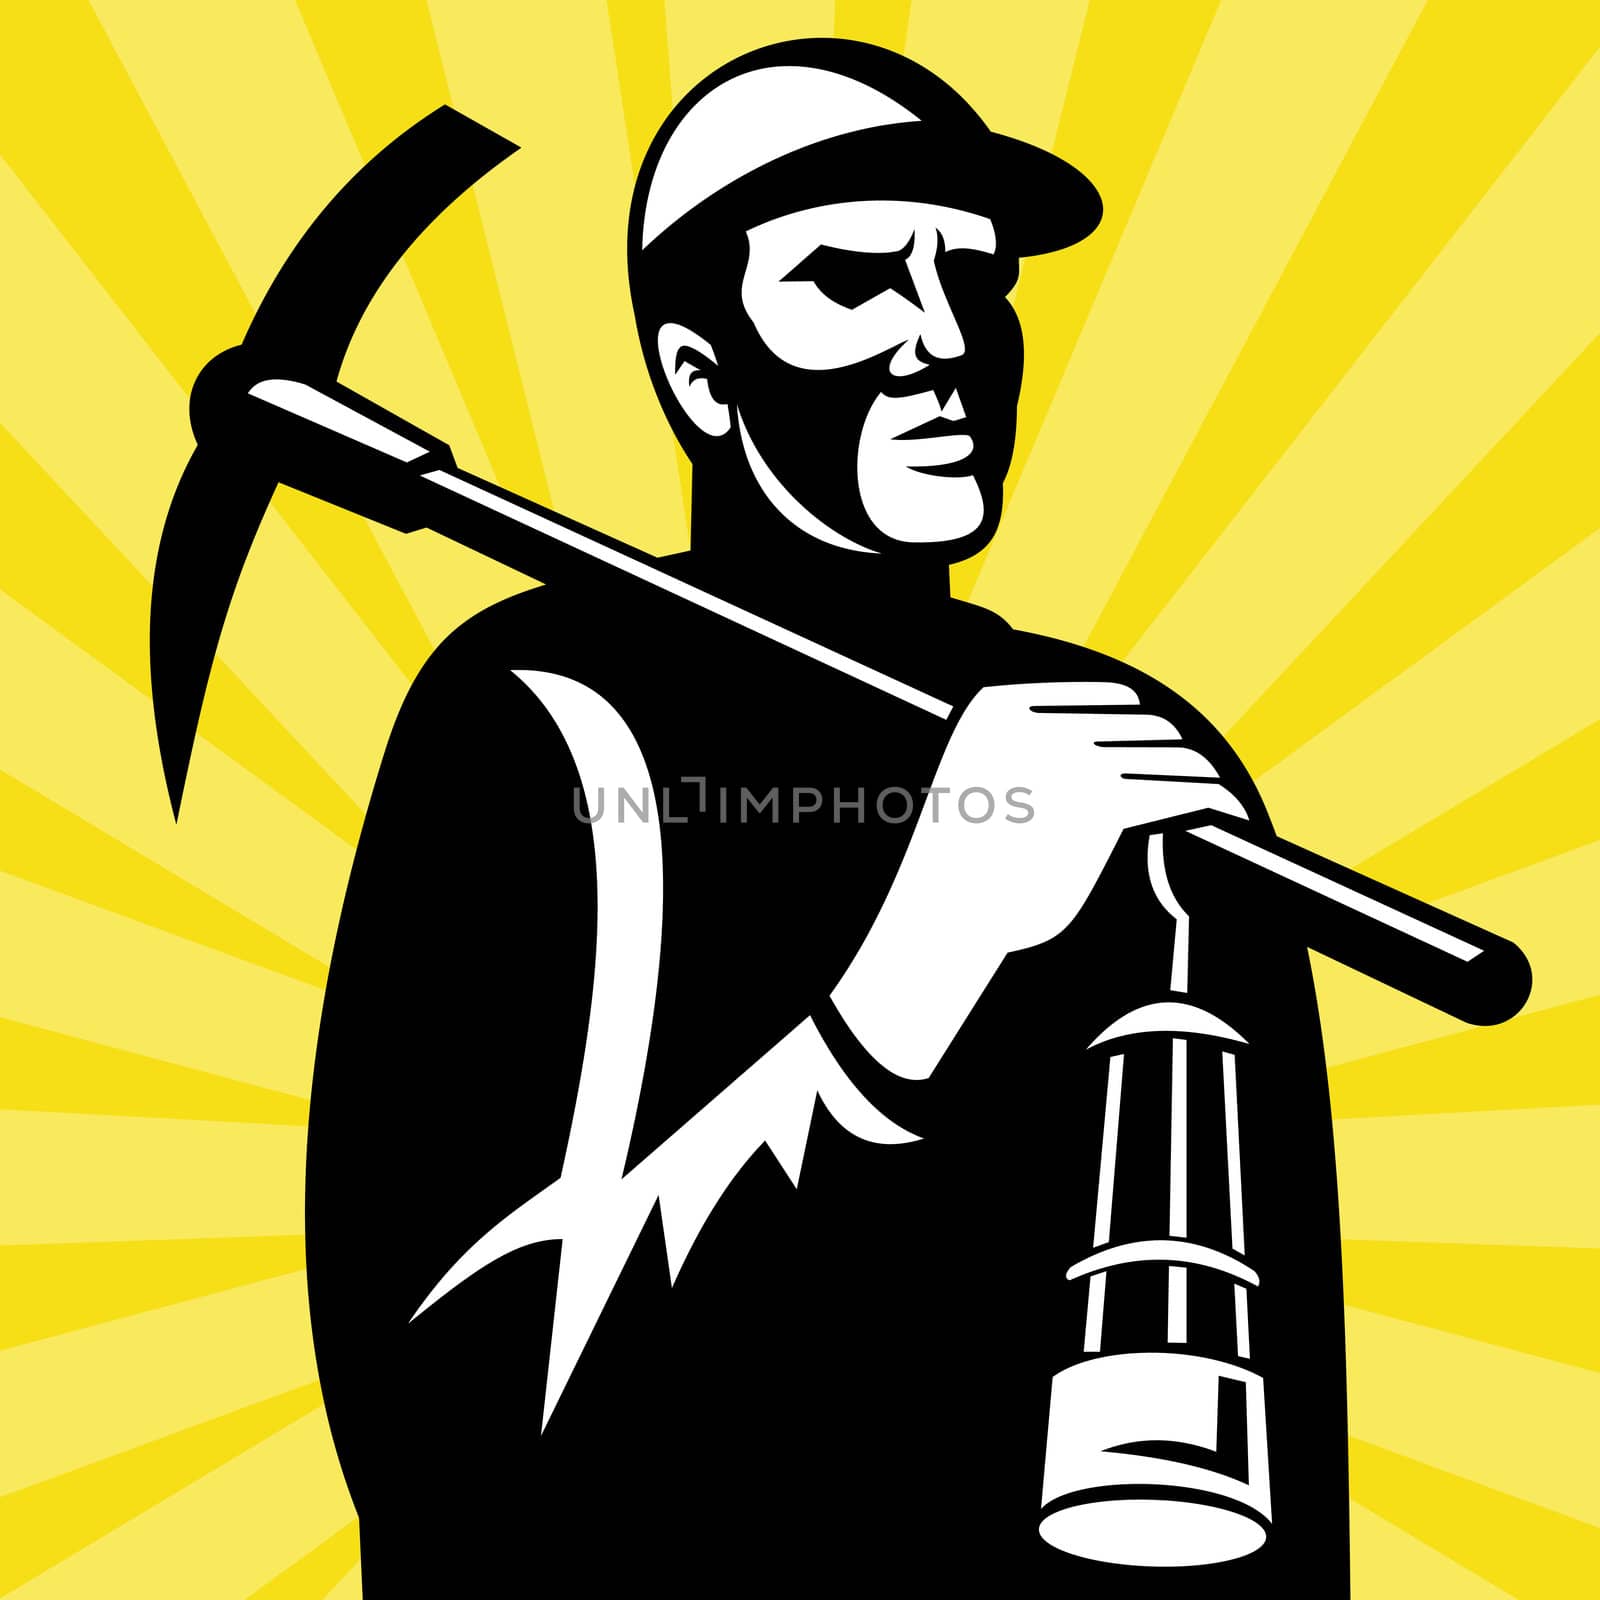 Coal miner with pick axe and lamp by patrimonio